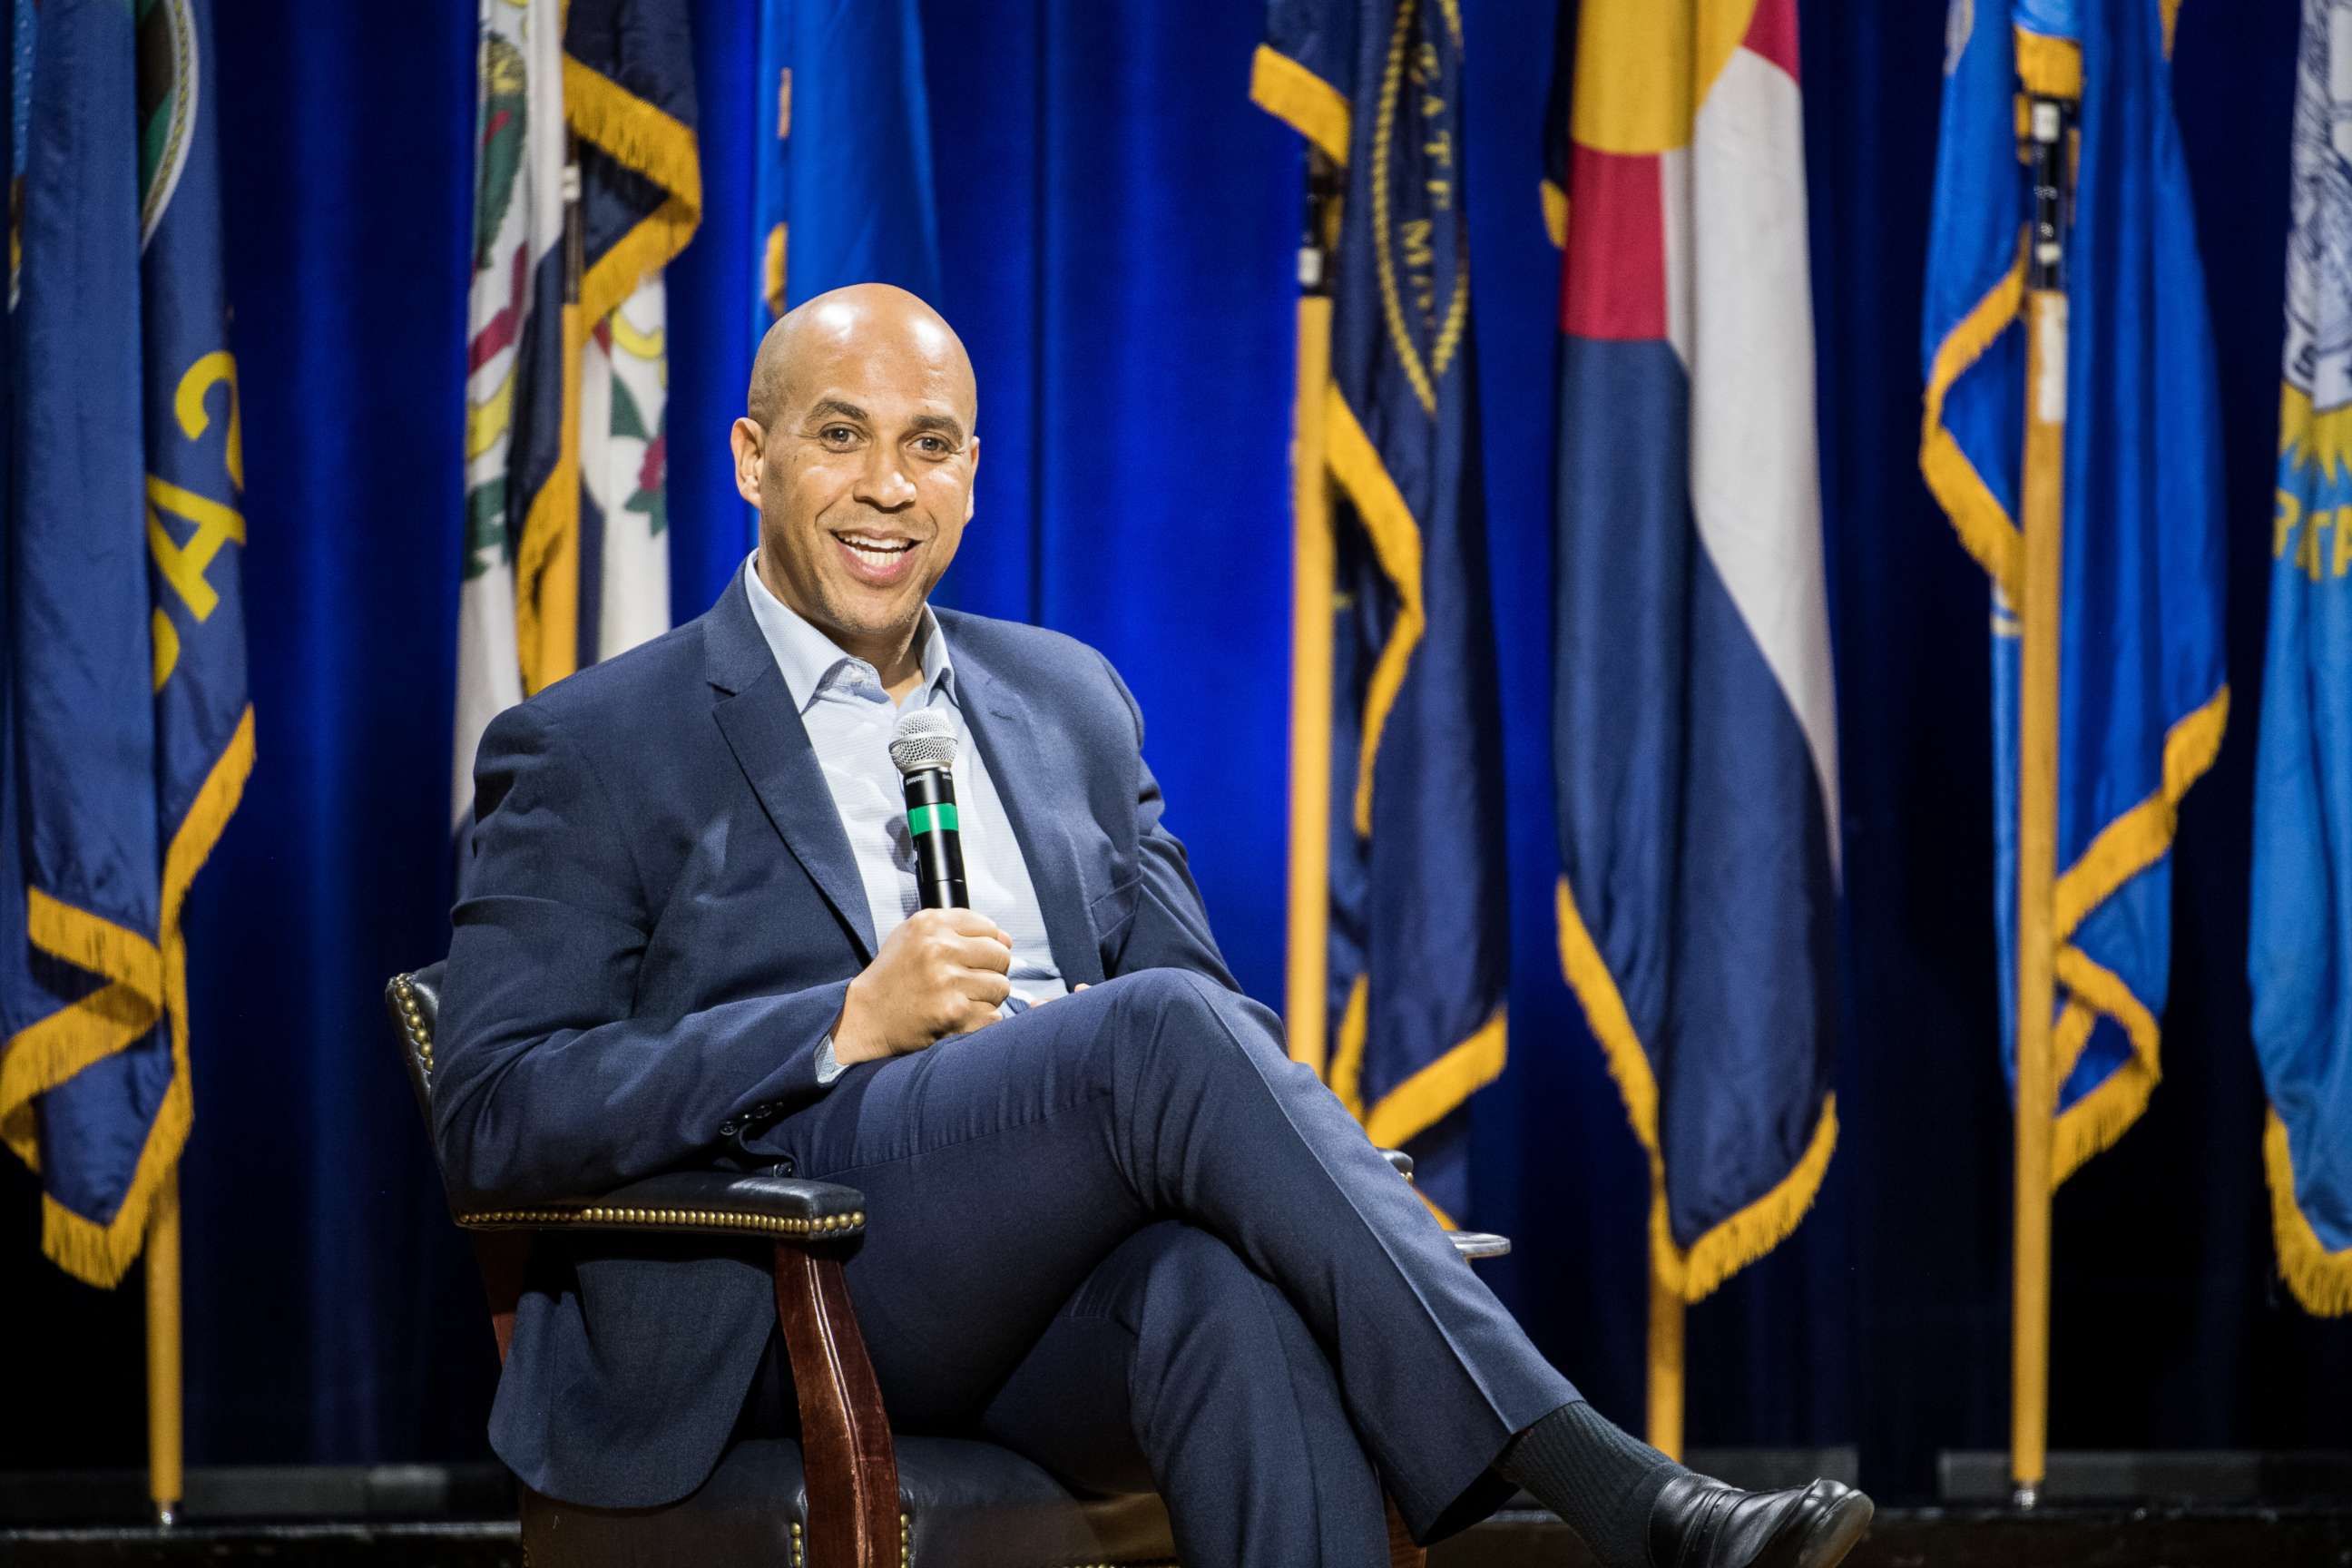 PHOTO: Democratic presidential candidate, U.S. Sen. Cory Booker addresses the audience at the Environmental Justice Presidential Candidate Forum at South Carolina State University on November 8, 2019 in Orangeburg, South Carolina.